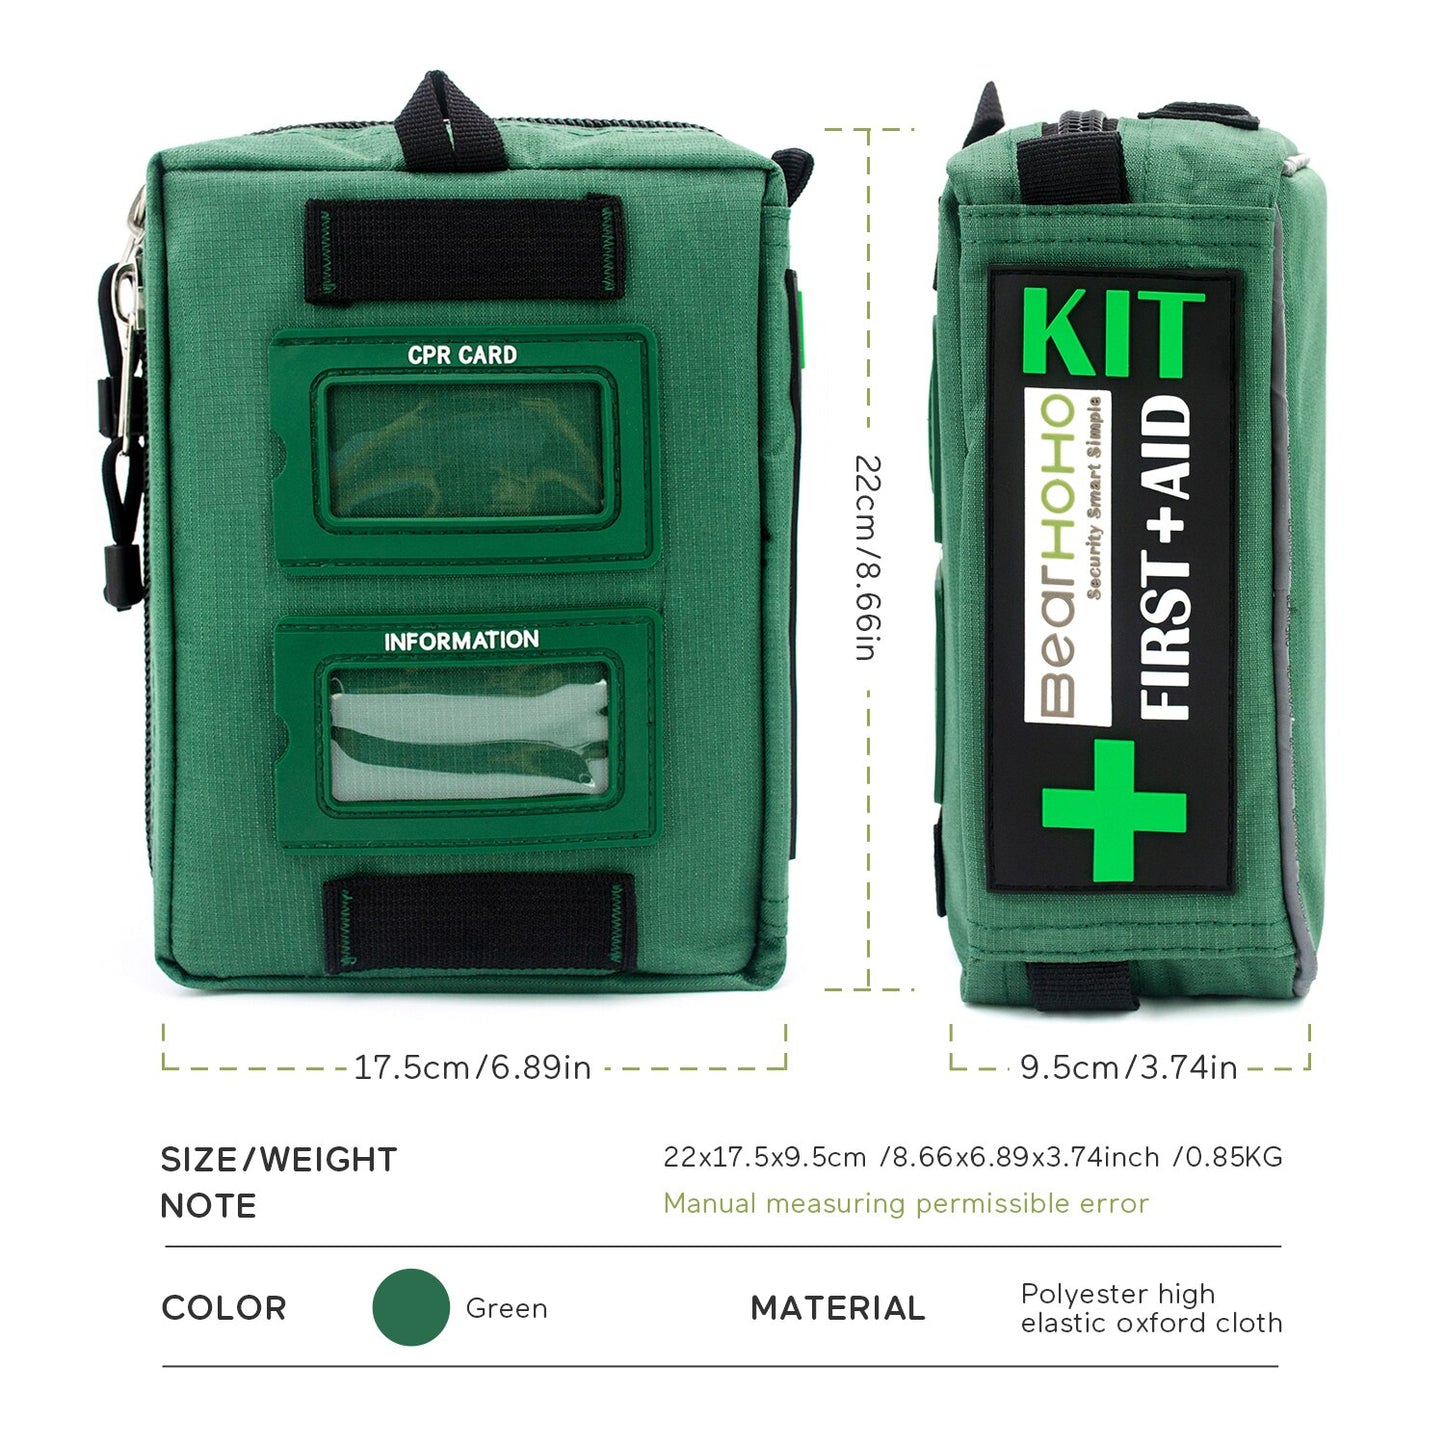 First Aid Kit Bag 3 Section Handy Lightweight Emergency Medical Rescue Outdoors Car Luggage School Hiking Survival Kit